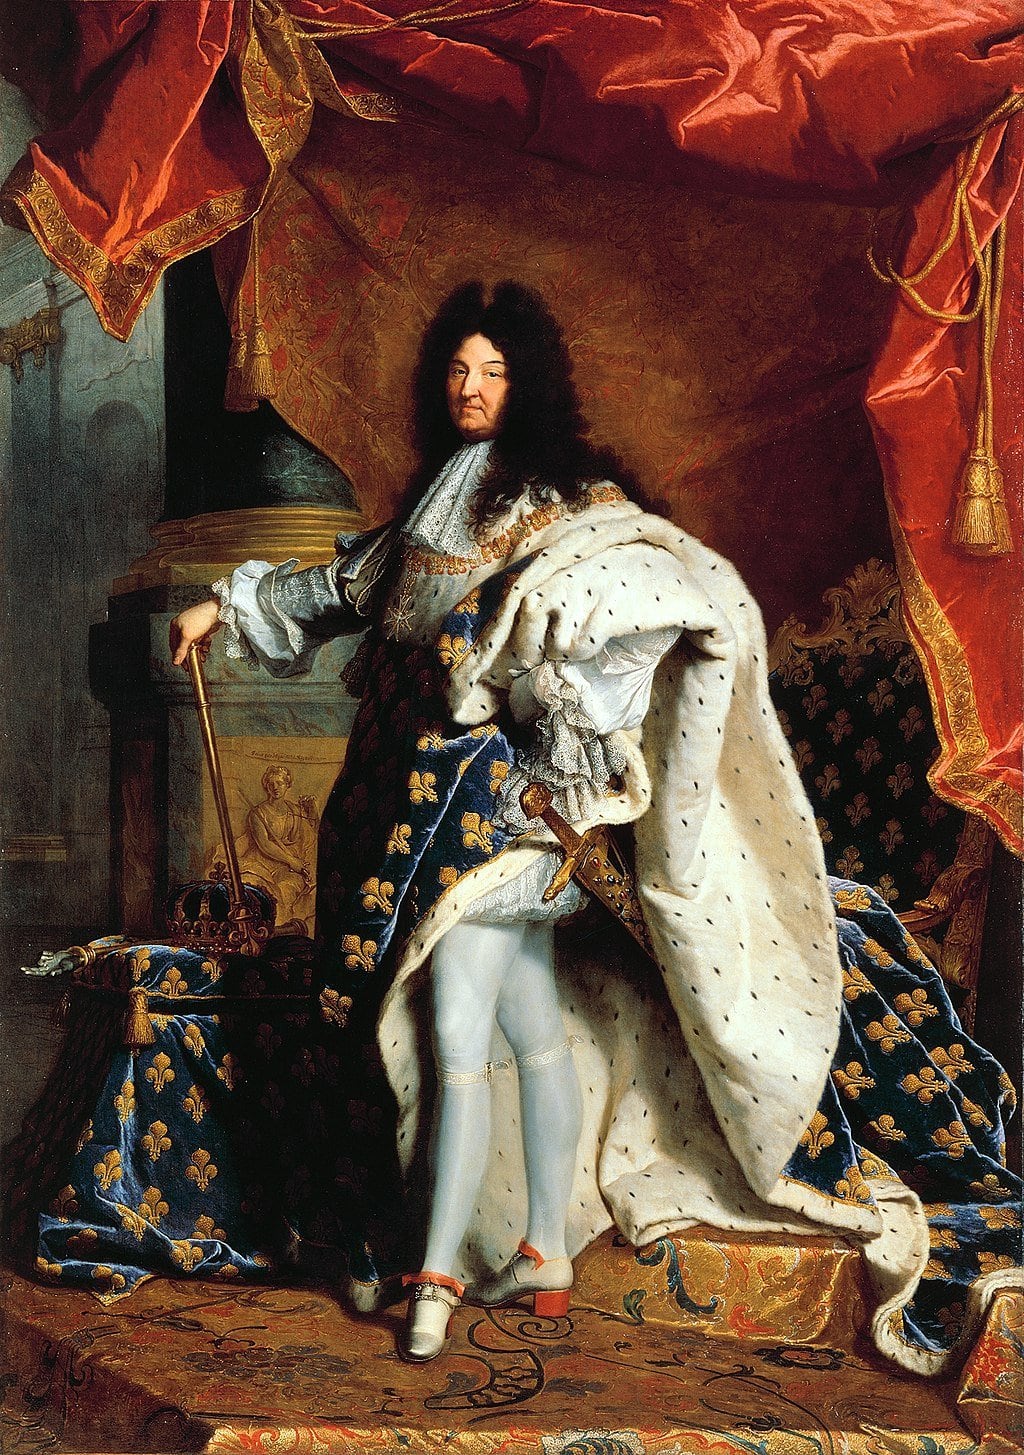 A portrait of Louis XIV in a pair of heels as a sign of nobility, painted by Hyacinthe Rigaud in 1701